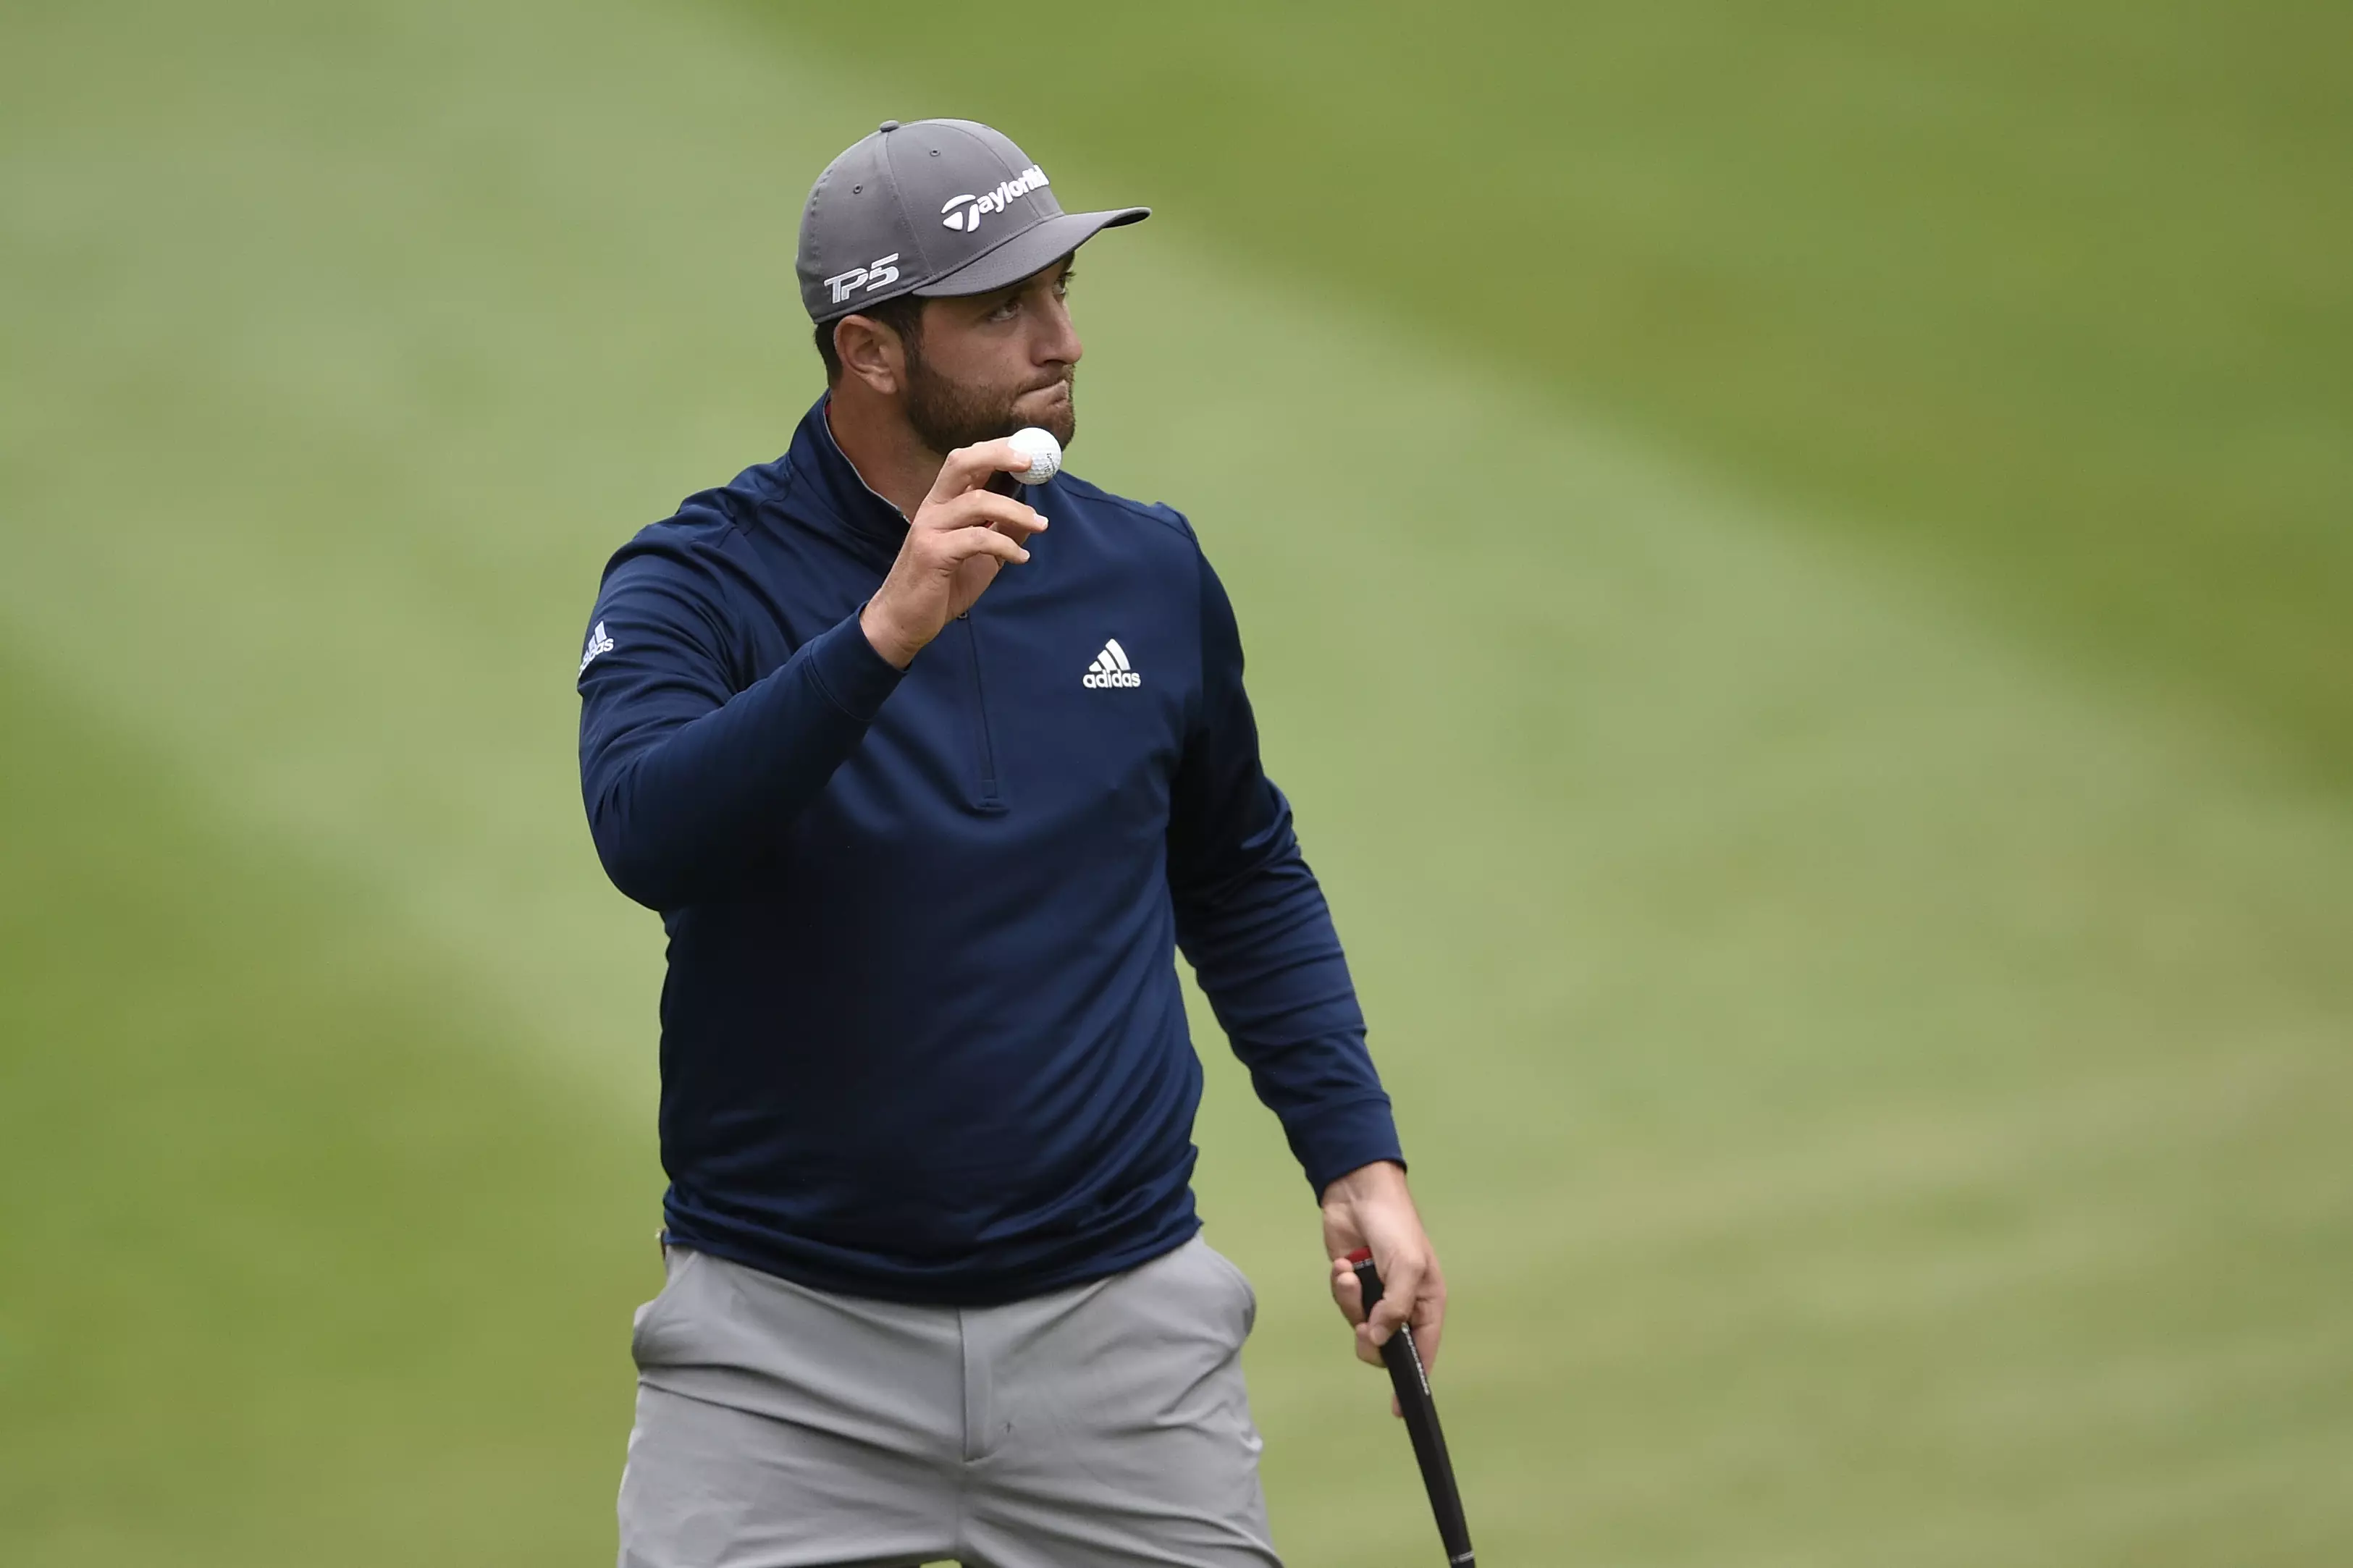 Jon Rahm wowed fans with an incredible shot during the practice round at the Augusta National.